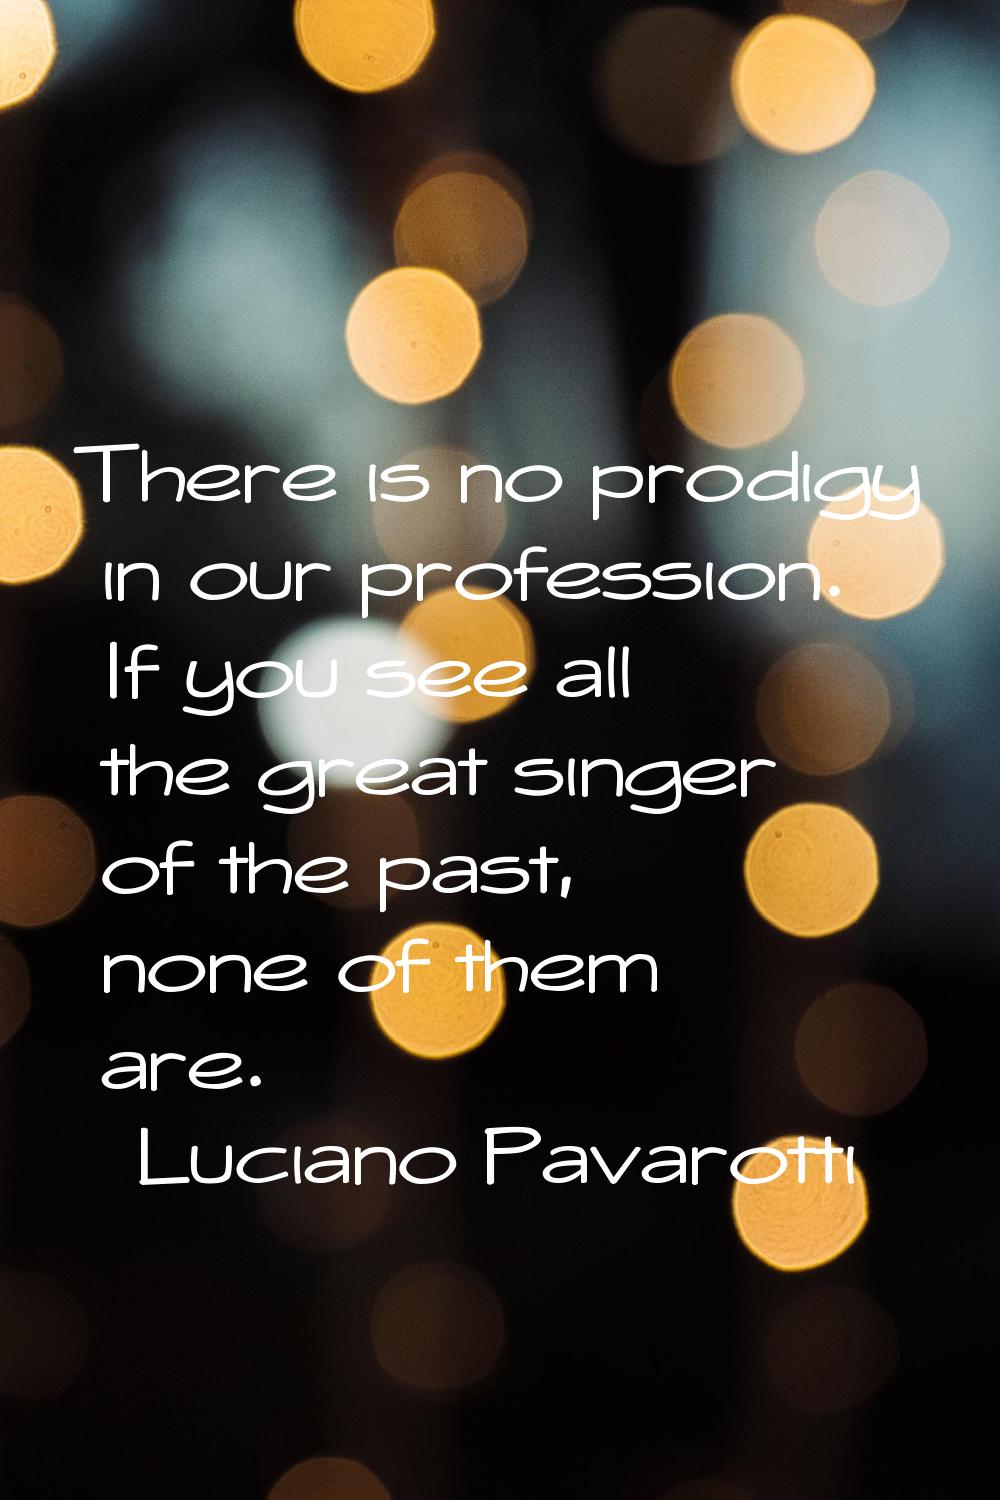 There is no prodigy in our profession. If you see all the great singer of the past, none of them ar